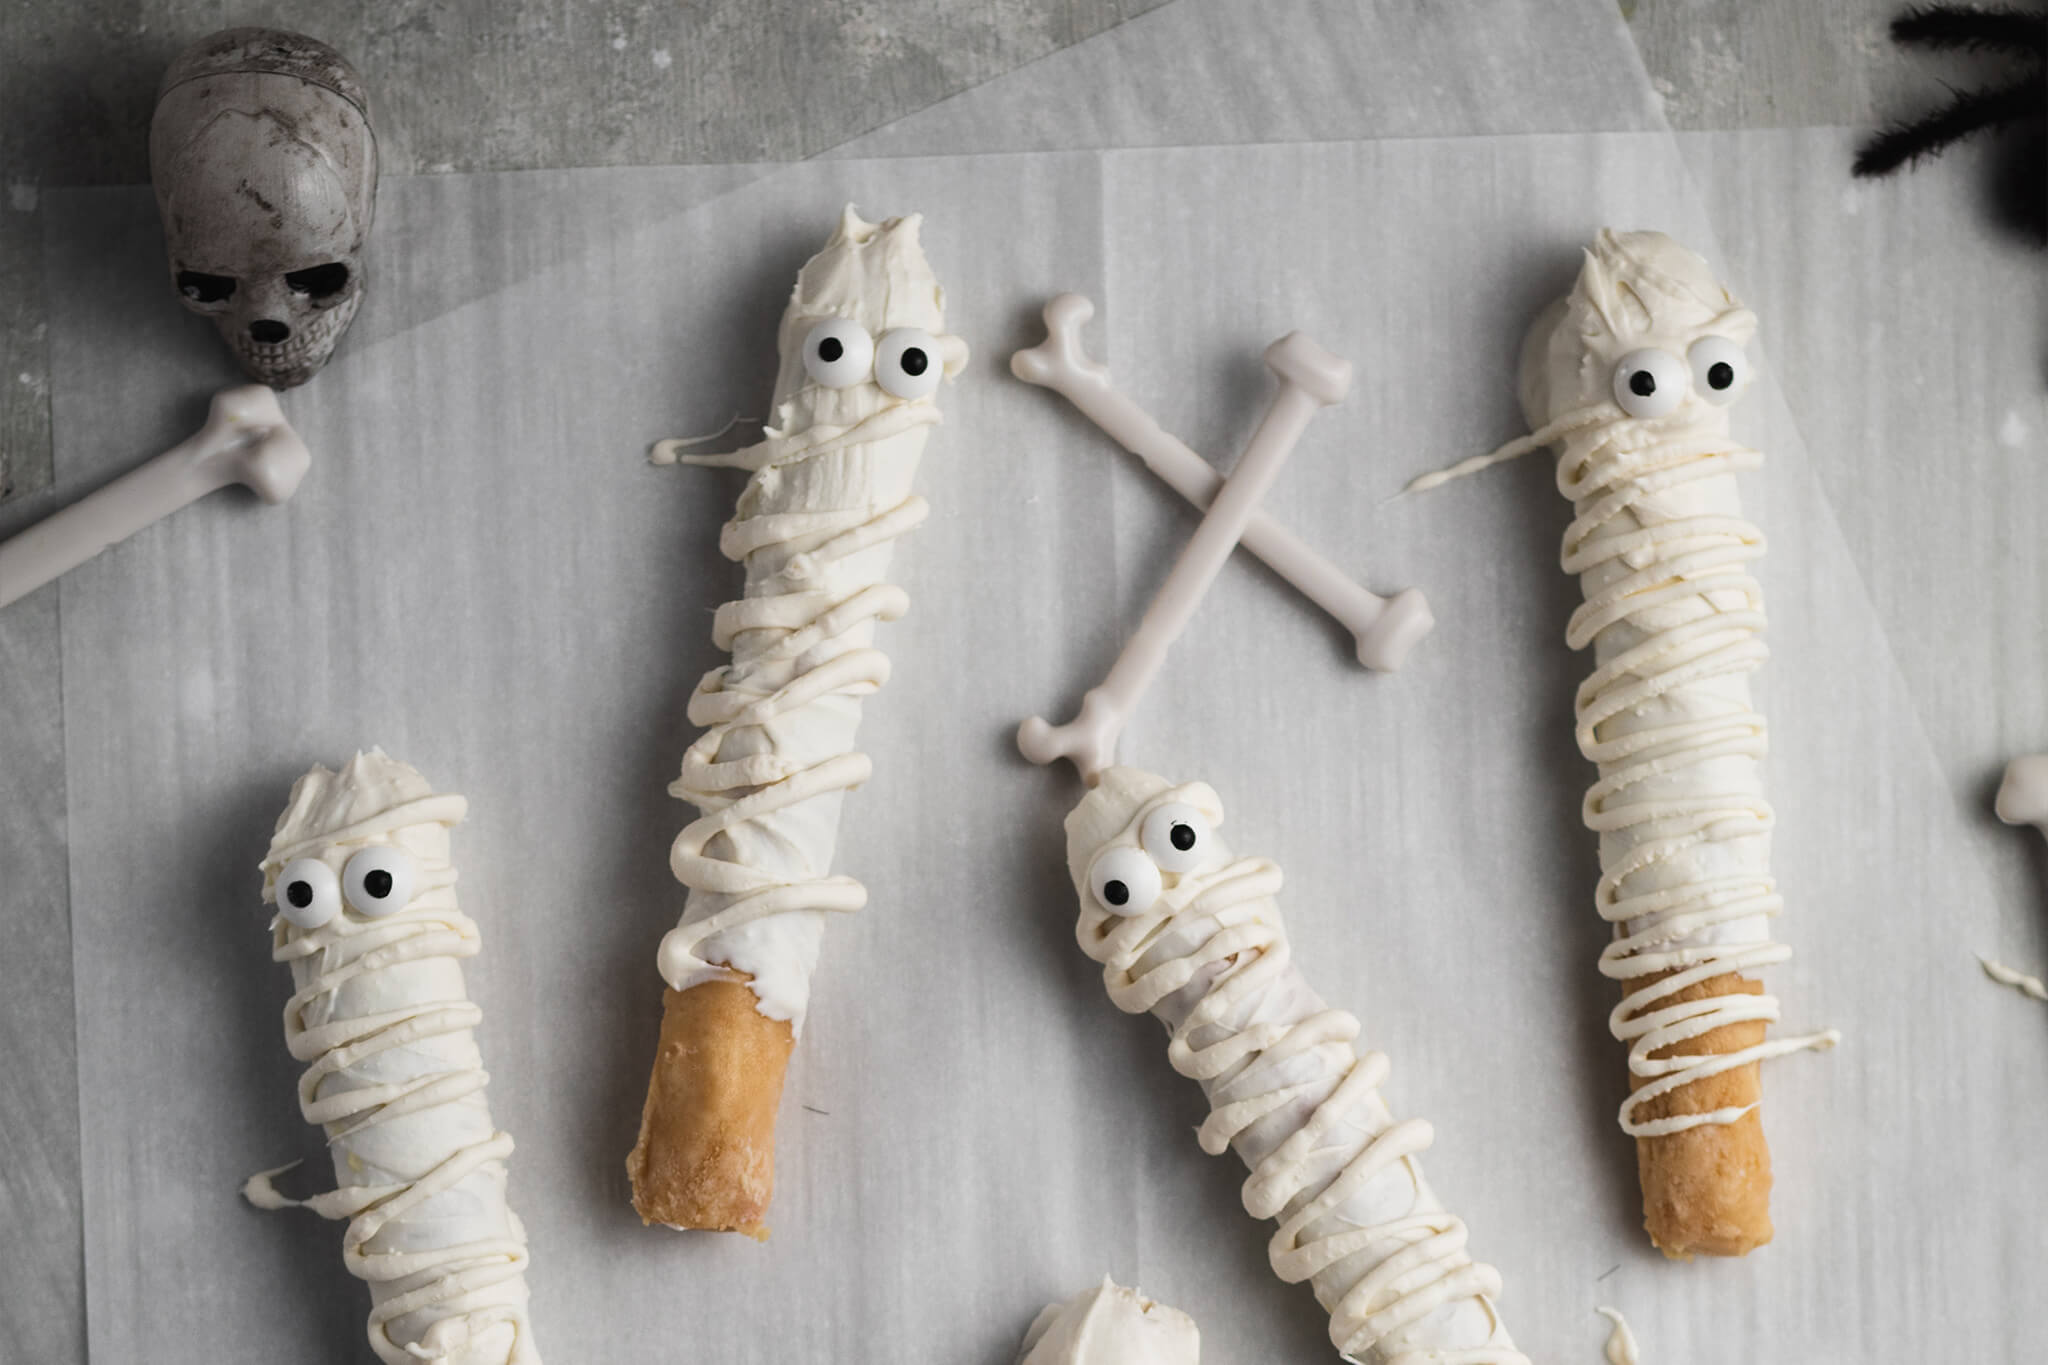 Cookie dough covered licorice dipped in white chocolate with drizzle and candy eyeballs made to look like mummies